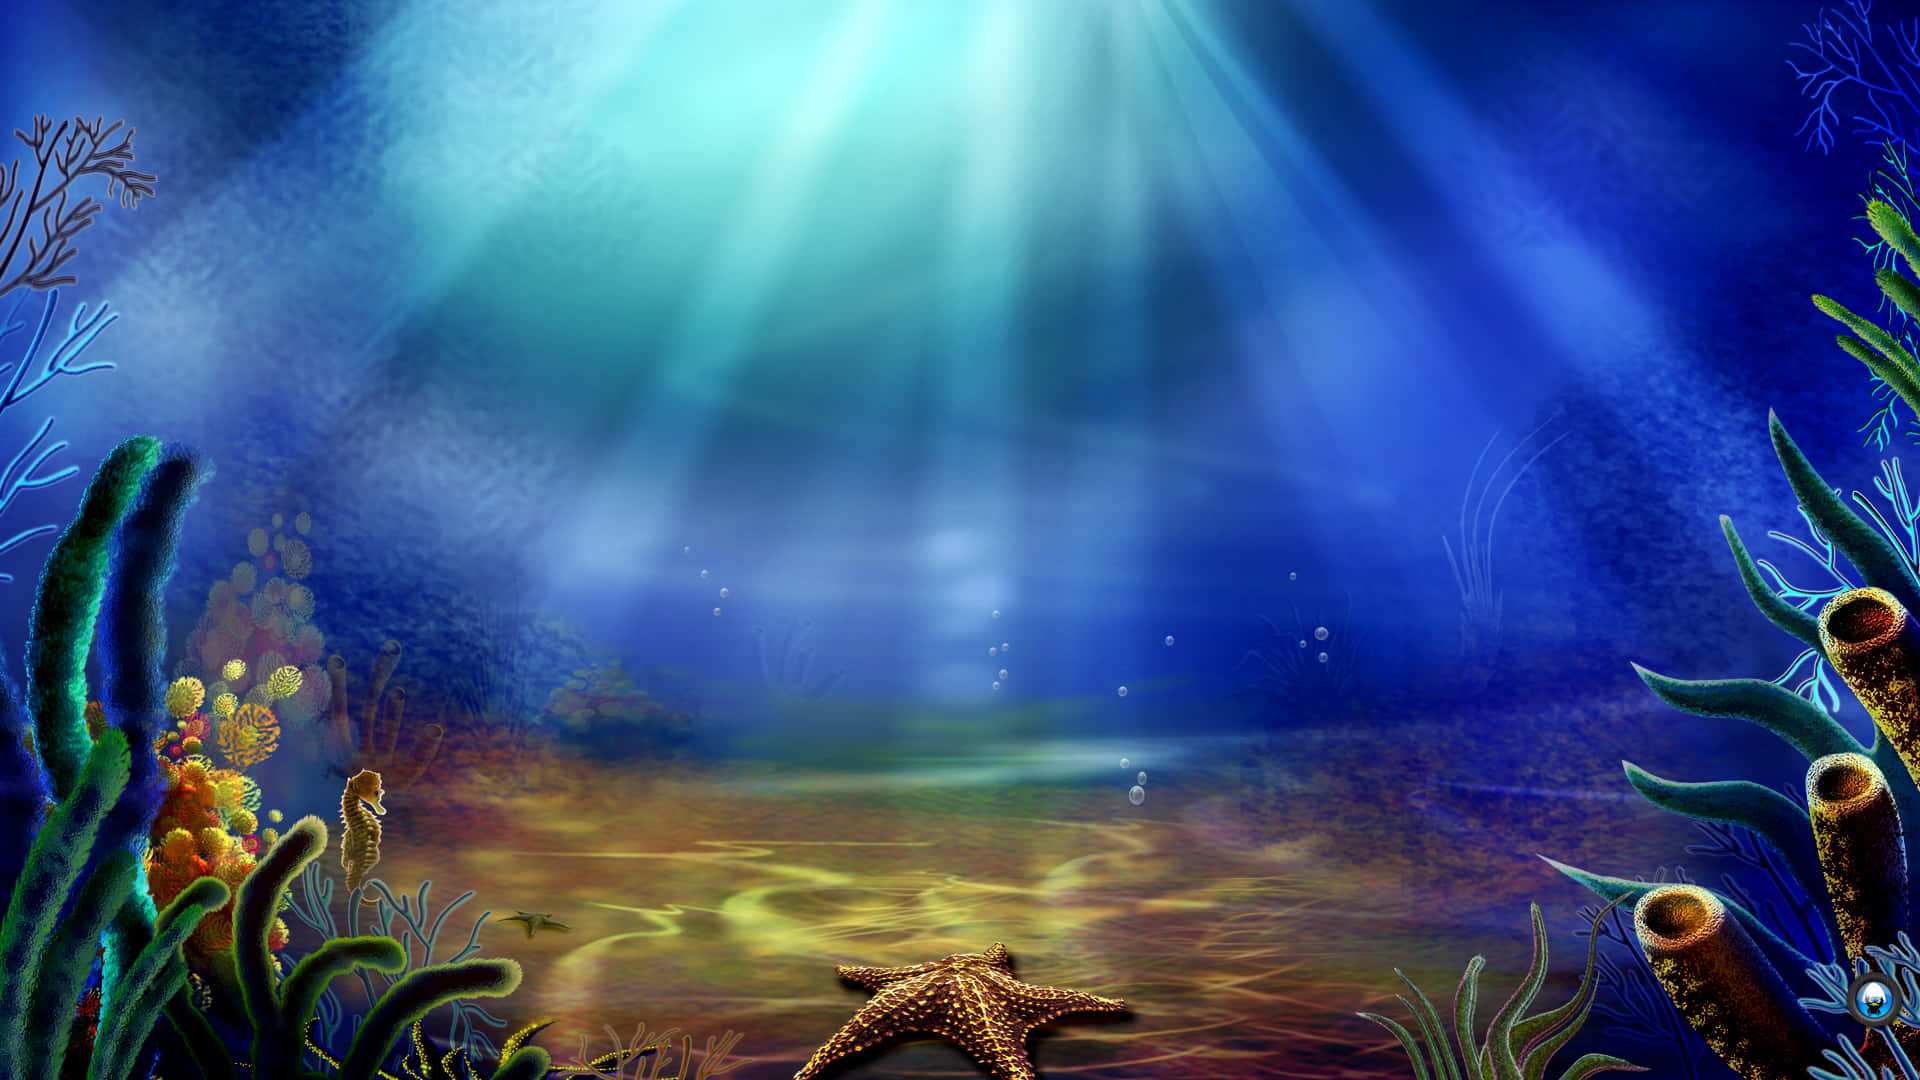 Underwater Seascape With Starfish And Corals